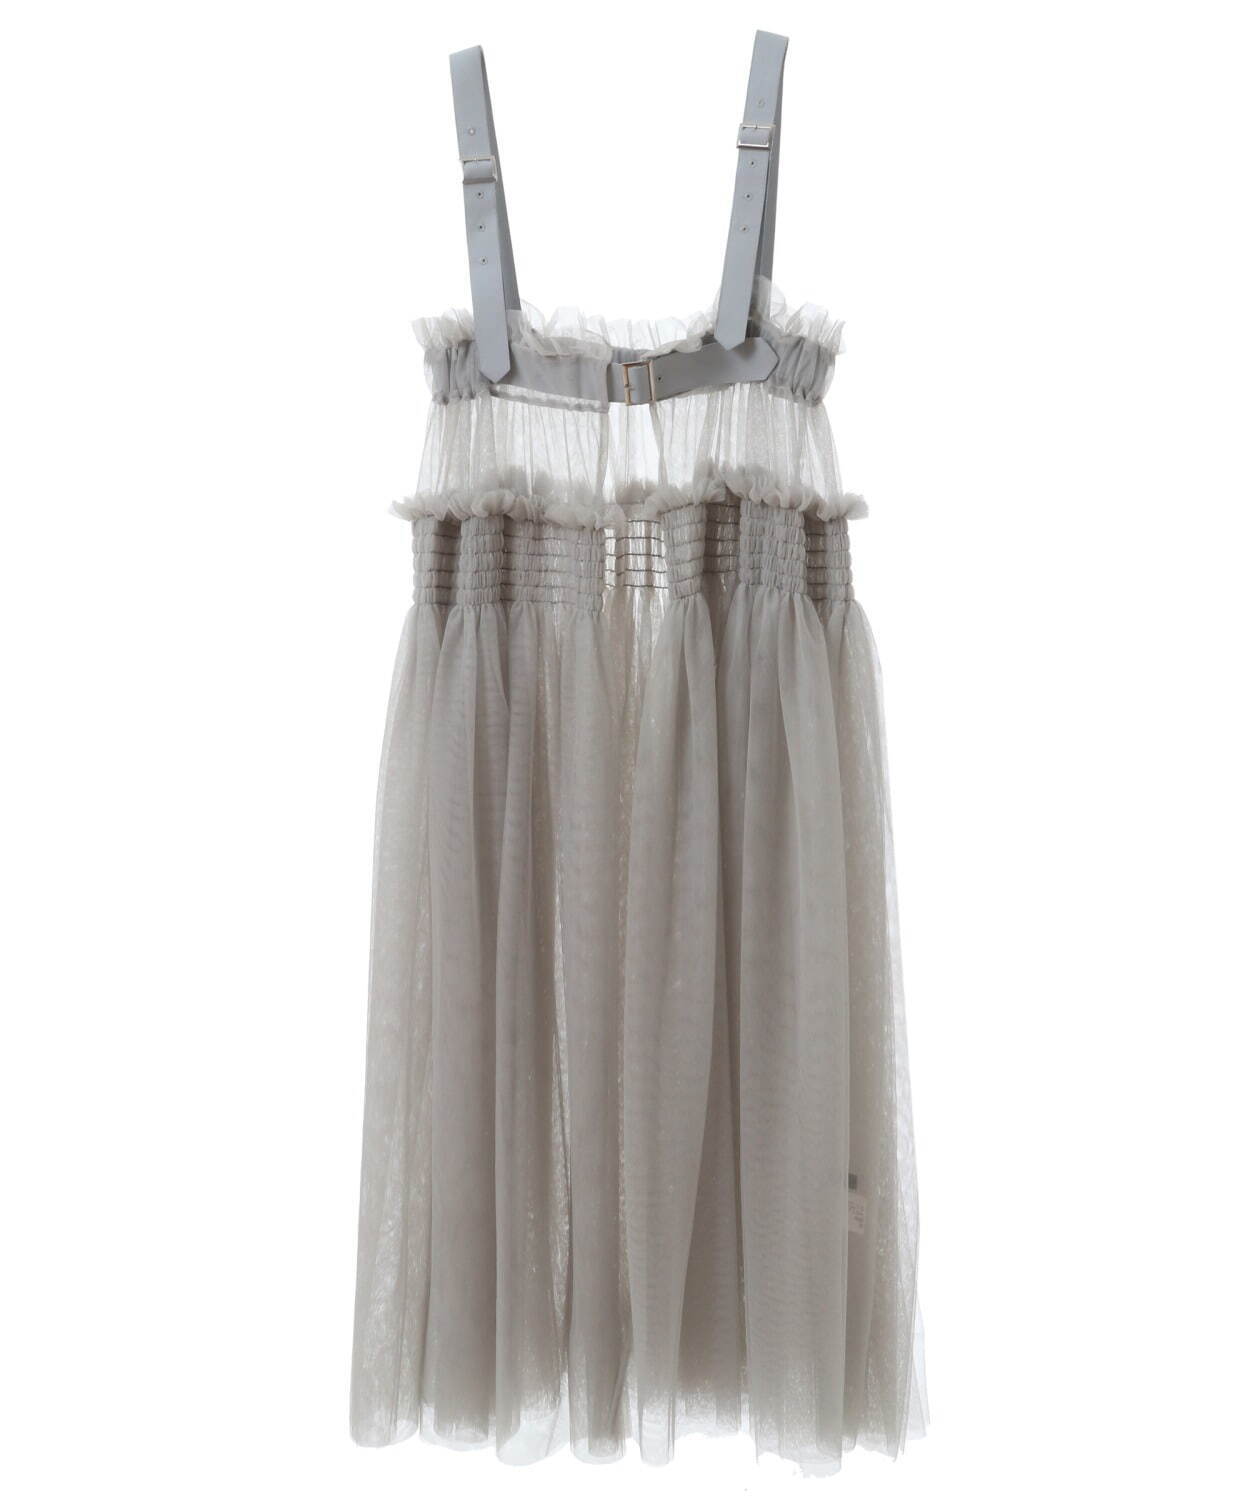 MARRY ME HARNESS TULLE SKIRT 22,000円